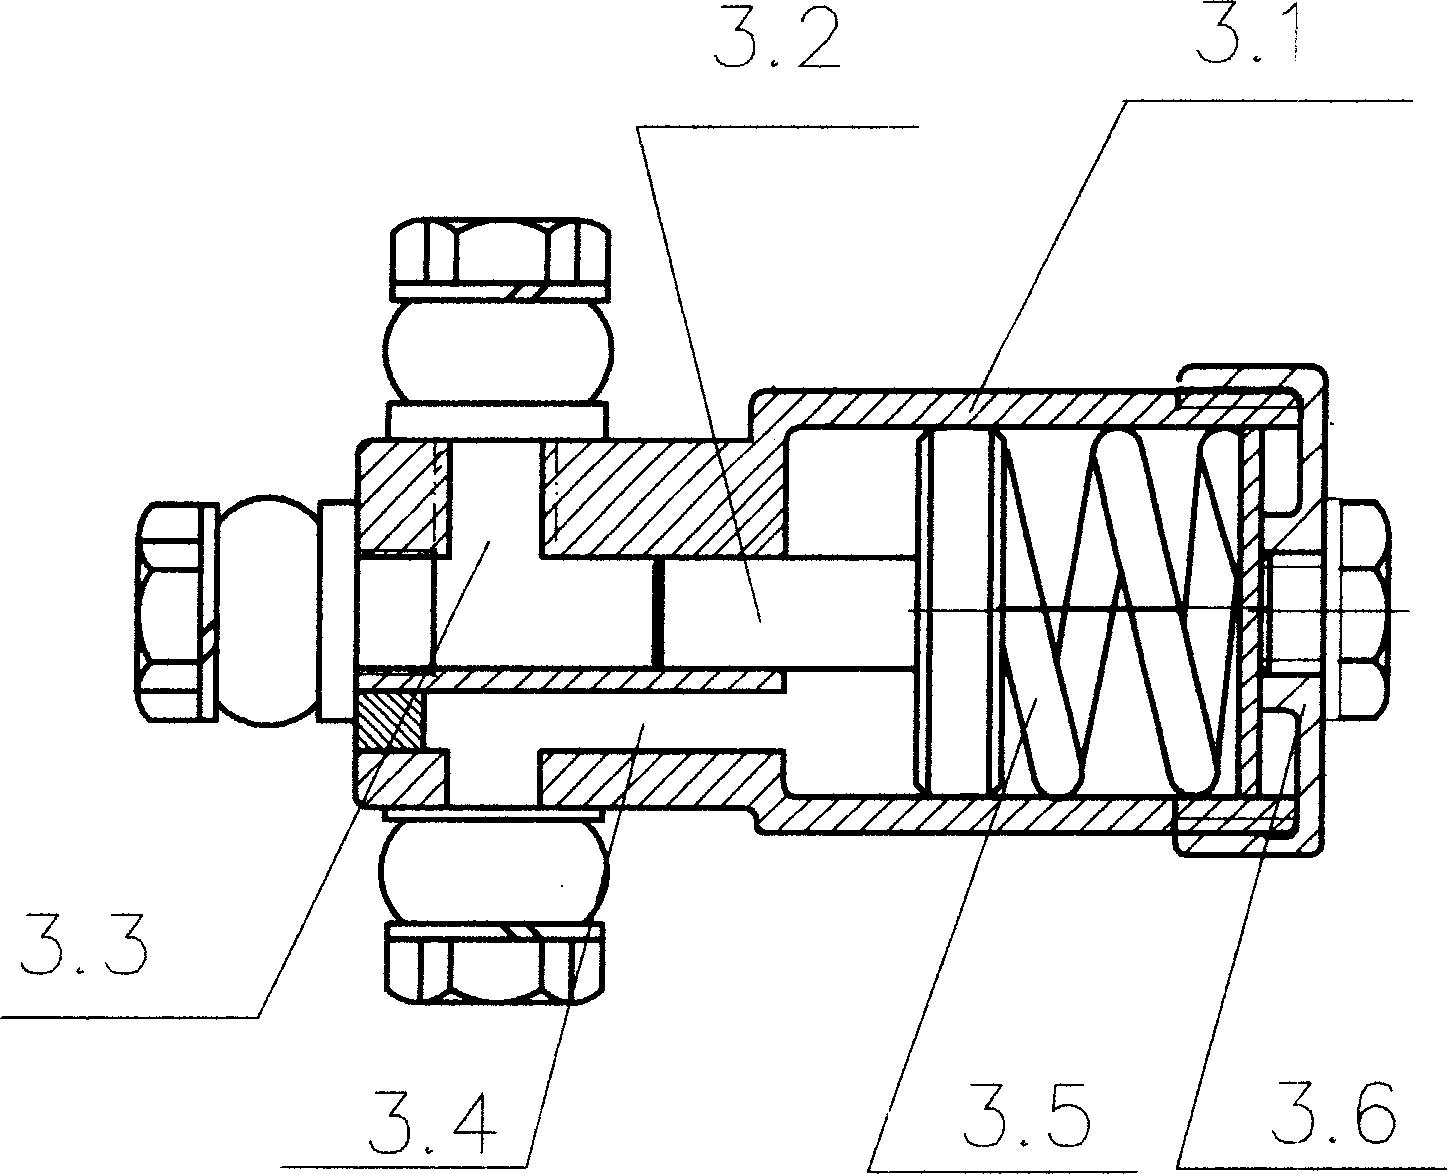 Hydraulic ABS device for motor vehicle